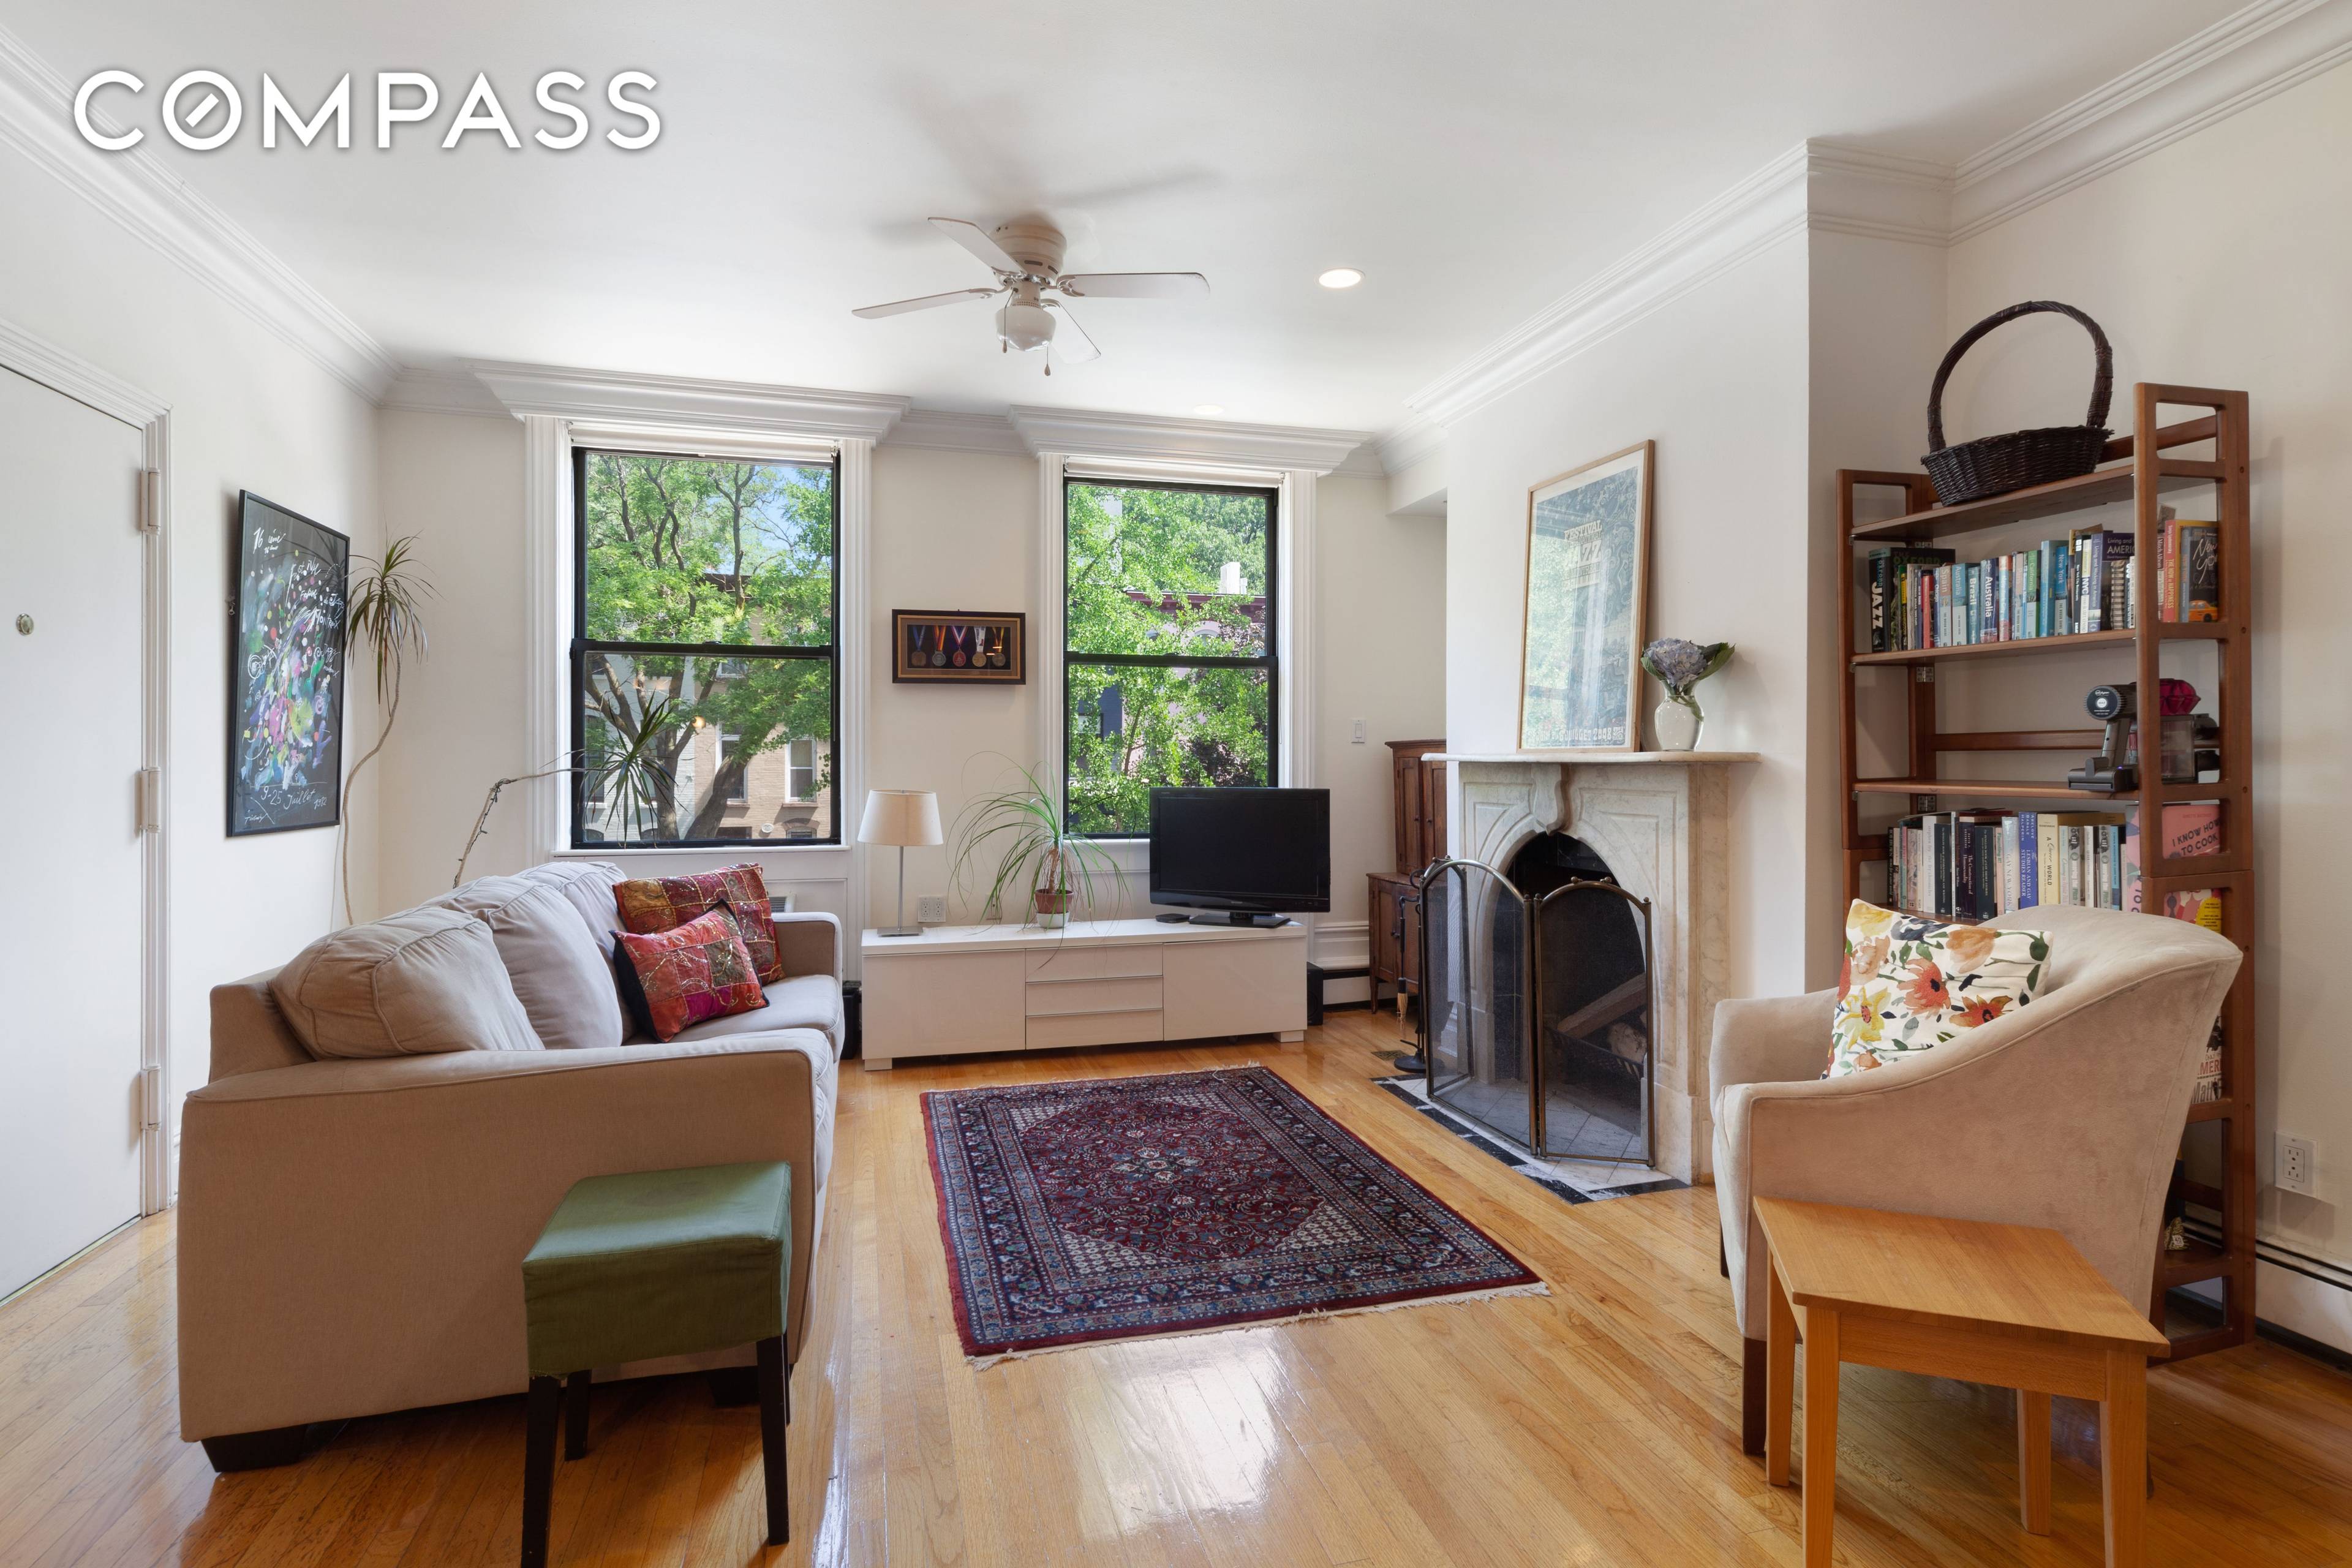 This charming 2BR townhouse parlor floor through in Boerum Hill features gracious proportions, high ceilings and charming details, including hardwood floors, wood burning fireplace with marble mantel amp ; crown ...